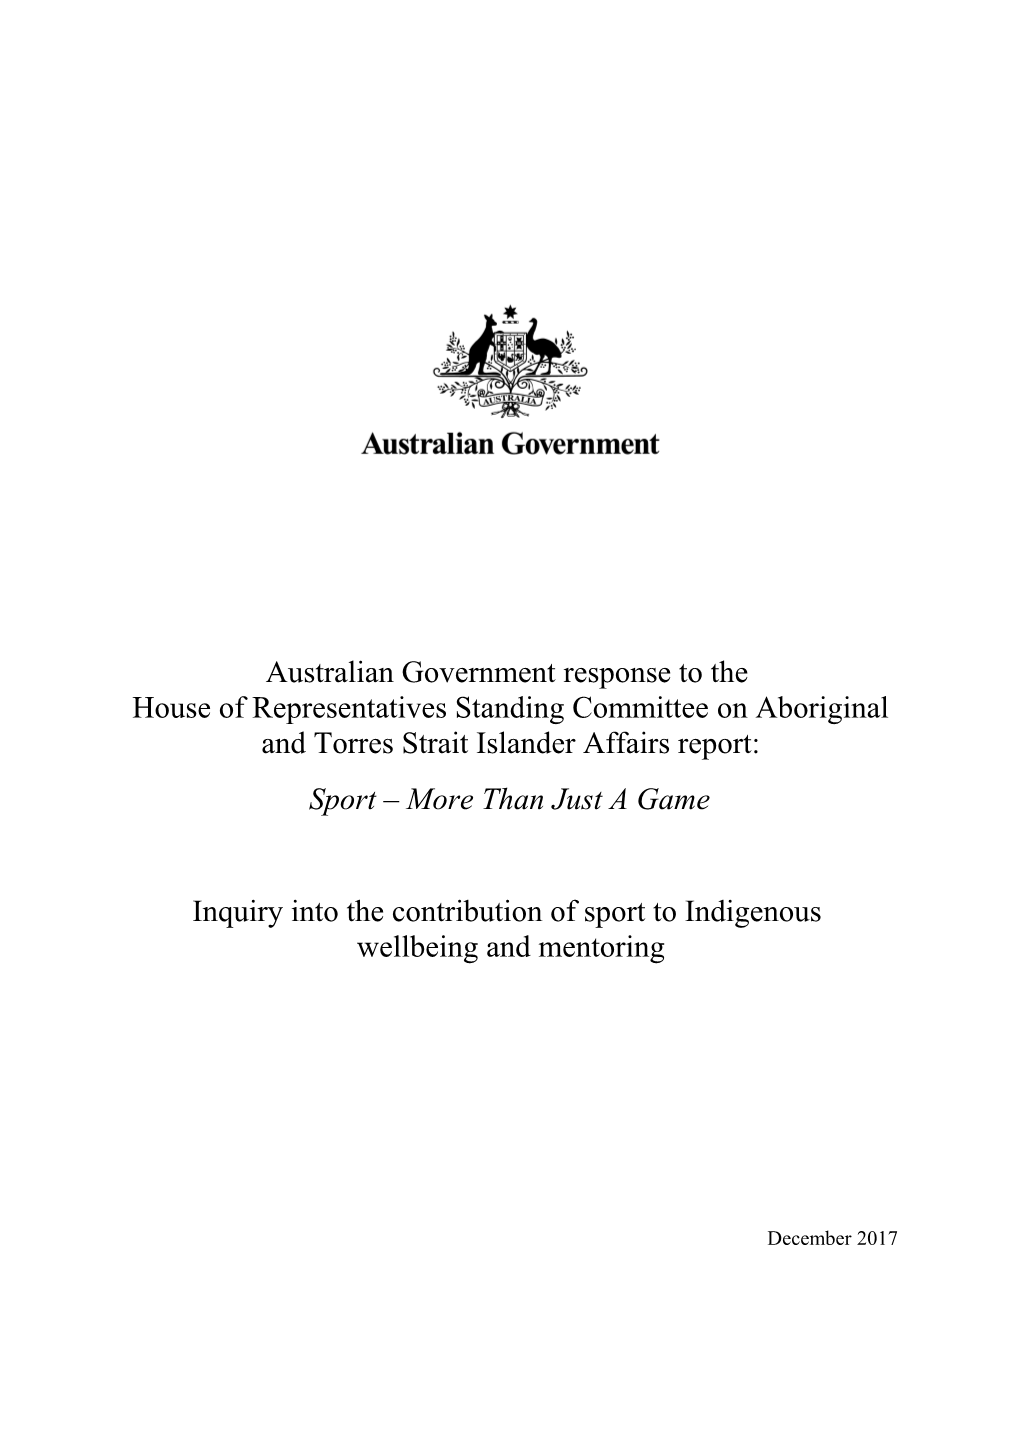 Commonwealth Response to the House of Representatives Inquiry Into the Contribution Of